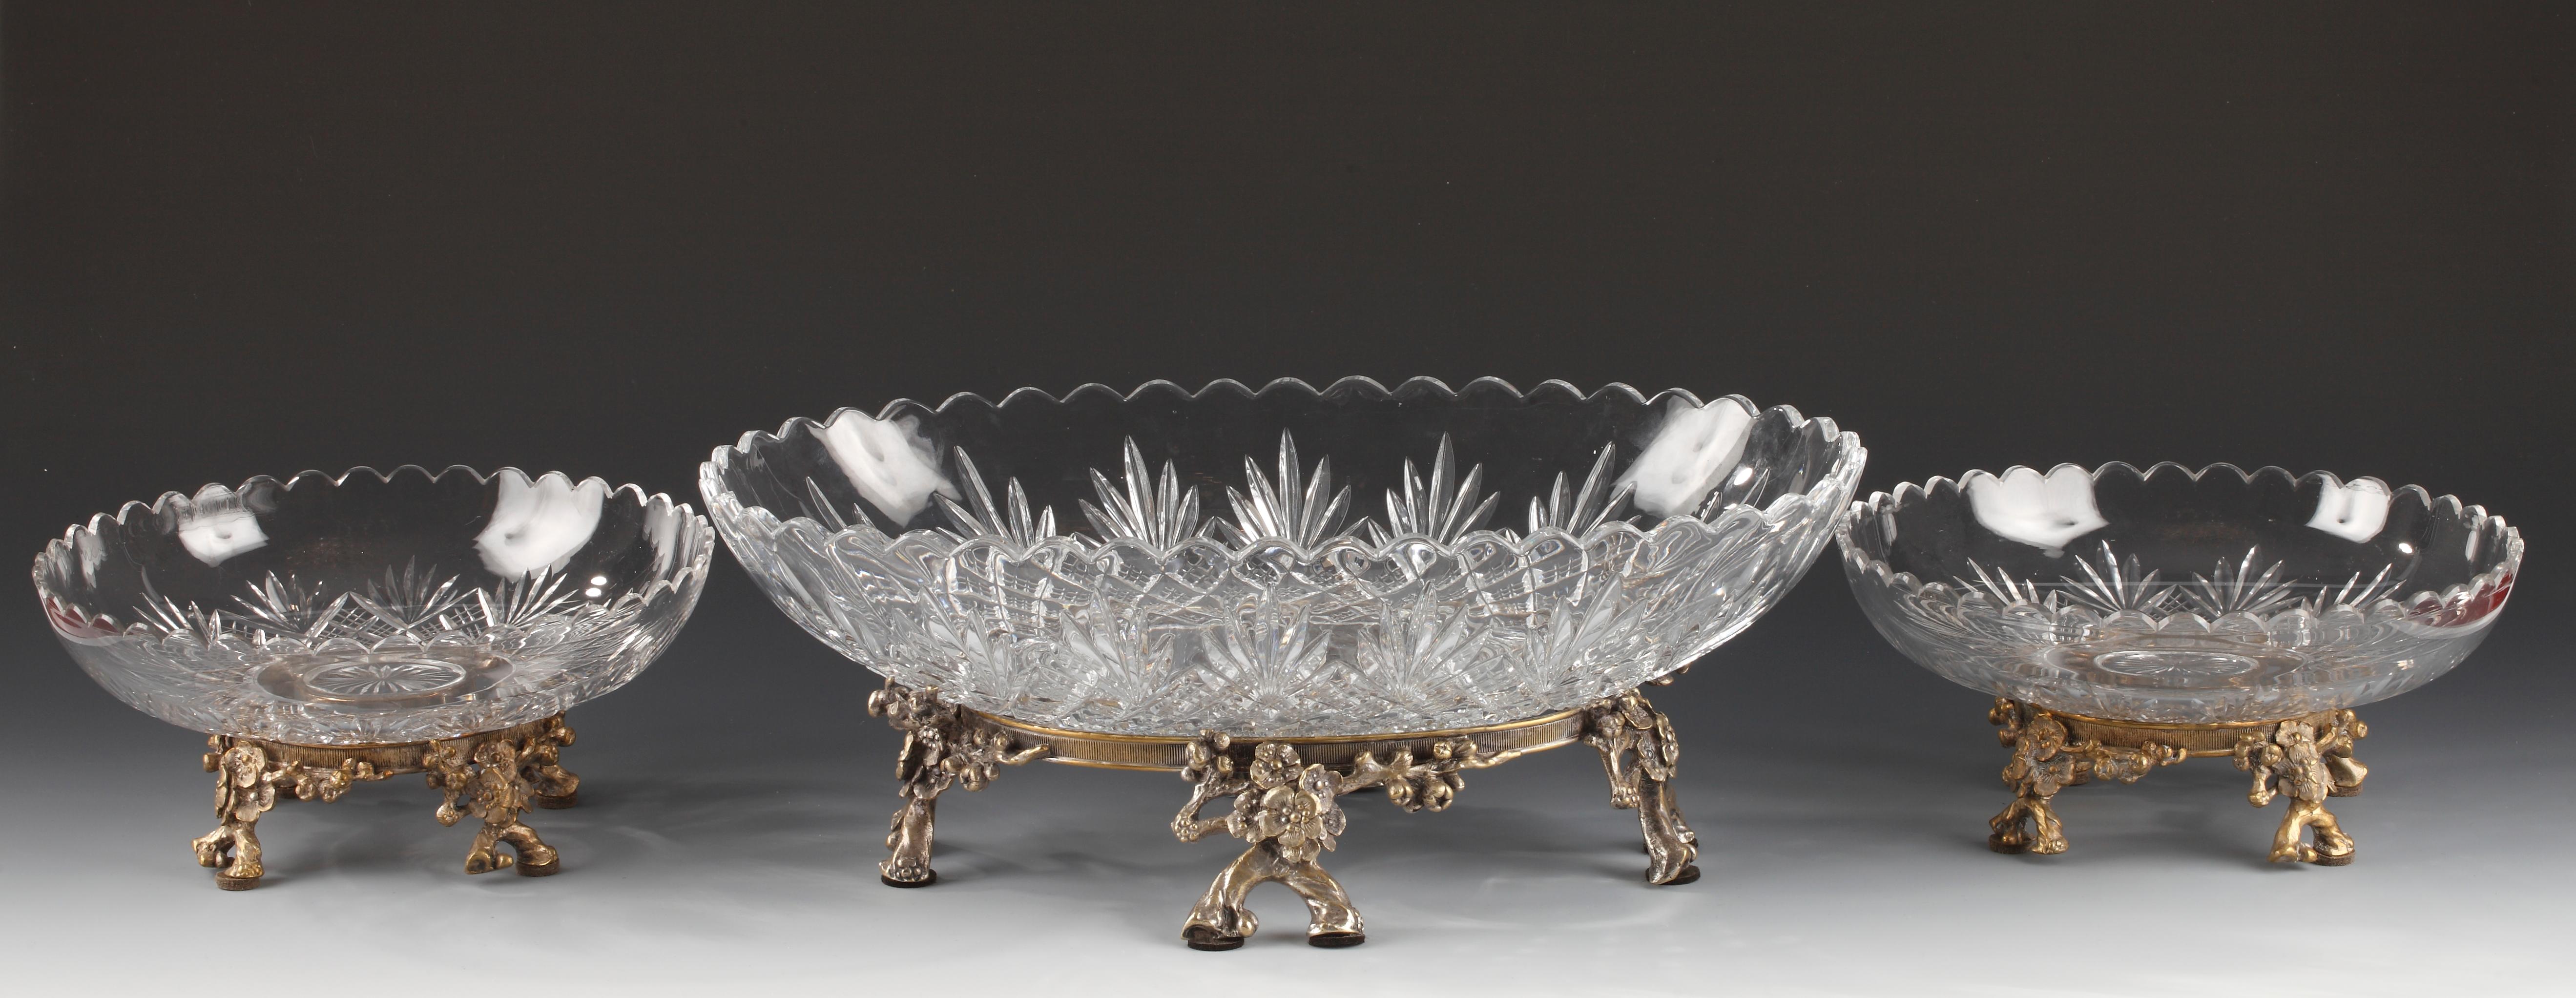 Elegant centerpiece attributed to Baccarat, composed of an oval cut-crystal cup and two circular cut-crystal cups decorated with stylized palmettes on a grid background, resting on a silvered bronze mount representing blooming branches.

Oval cup: